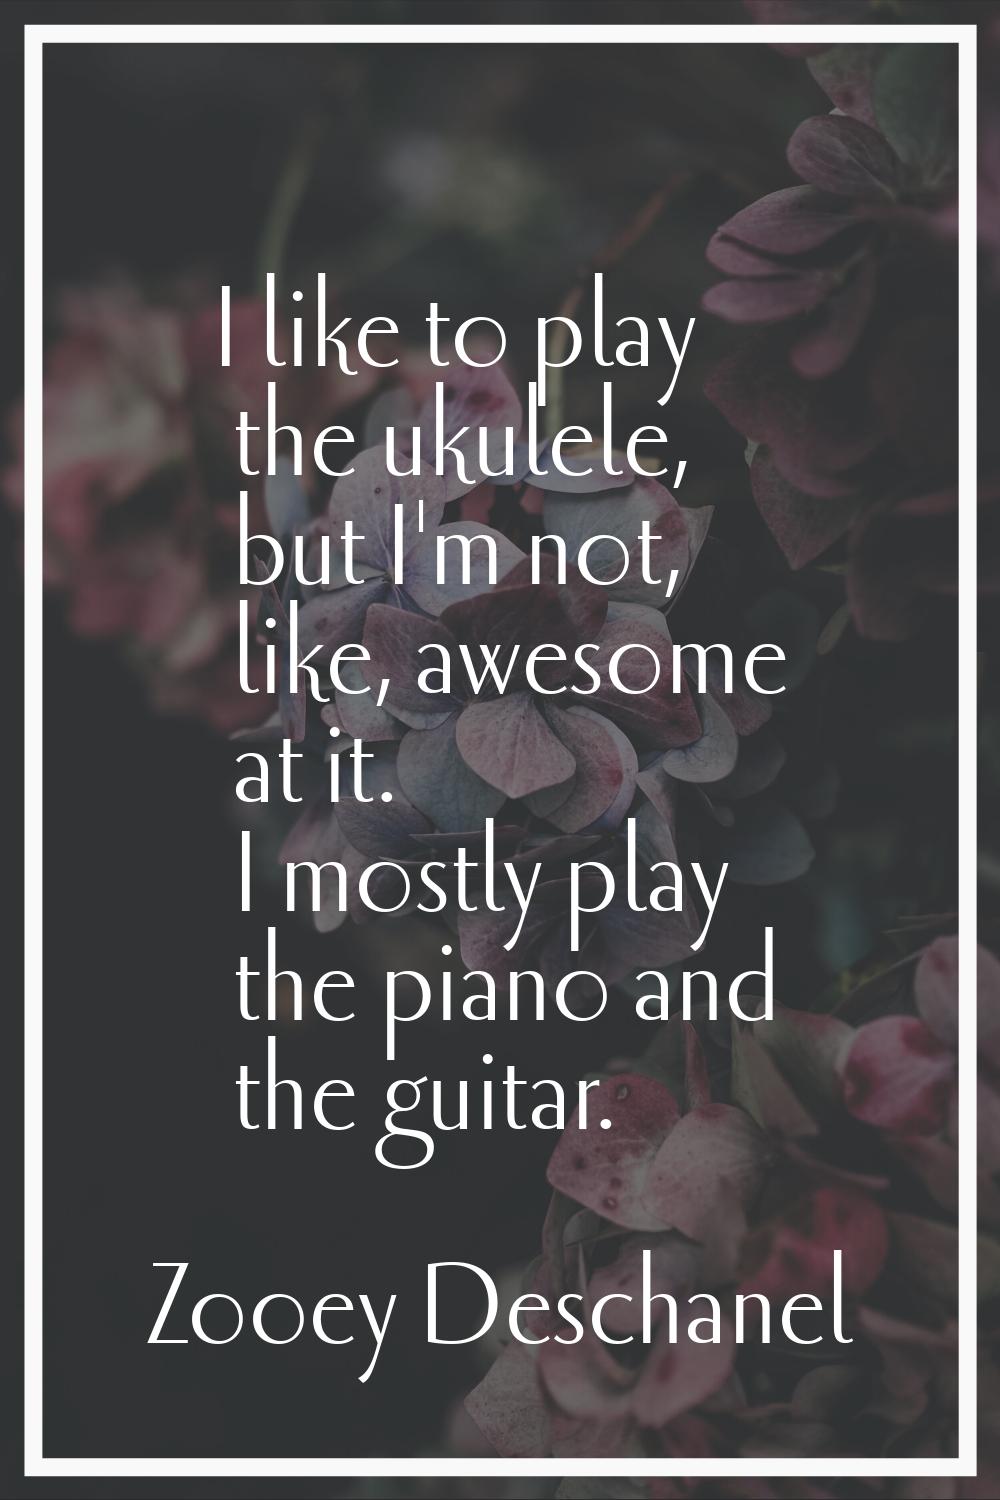 I like to play the ukulele, but I'm not, like, awesome at it. I mostly play the piano and the guita